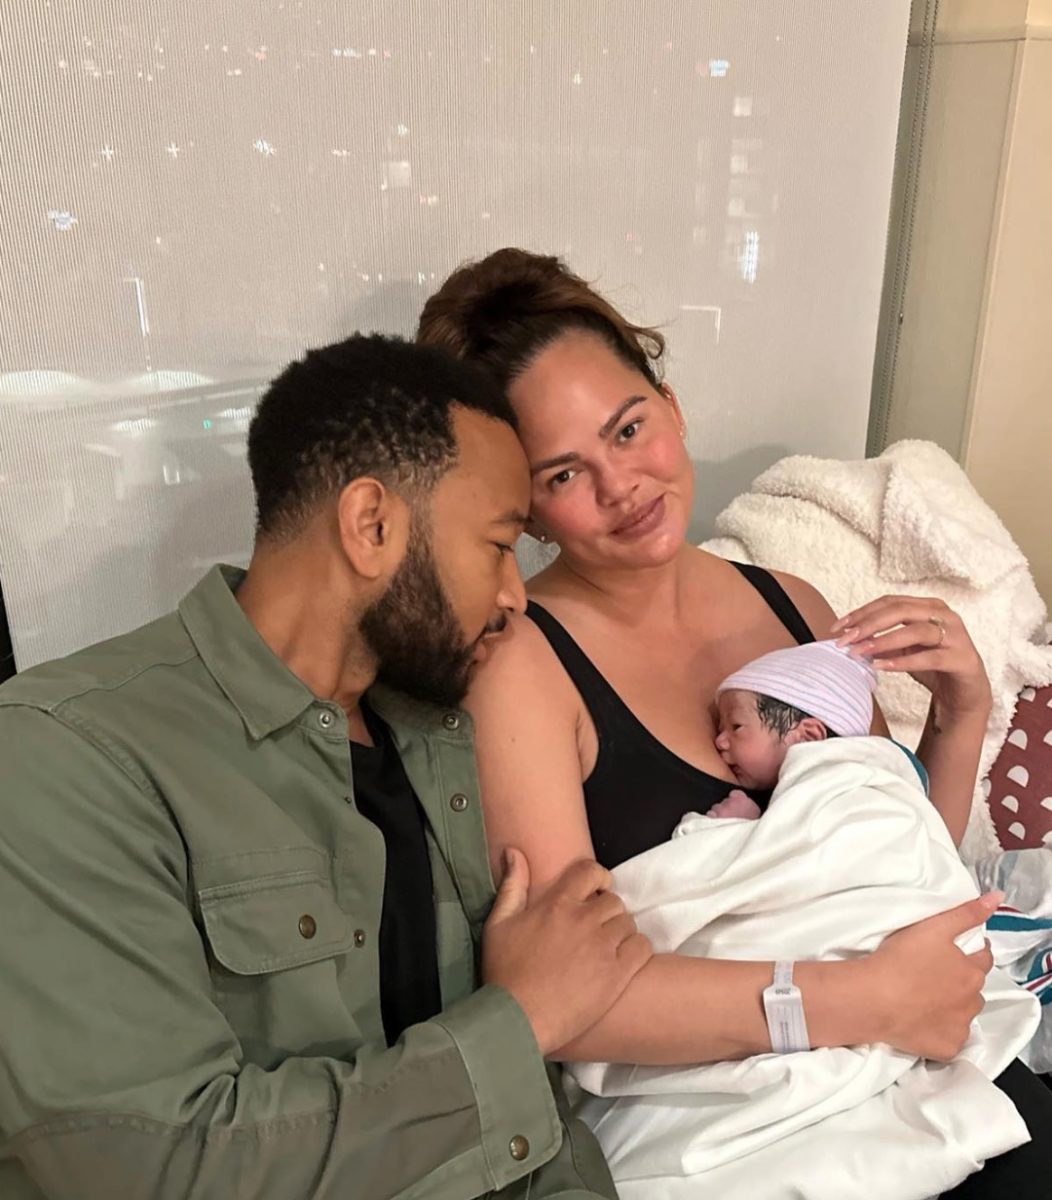 Chrissy Teigen Reveals She Spent Her Birthday With Her Late Son Jack | “For as long as I can remember, I’ve always wanted four children,” Chrissy Teigen wrote in her latest Instagram post. And now, her dream is her reality.